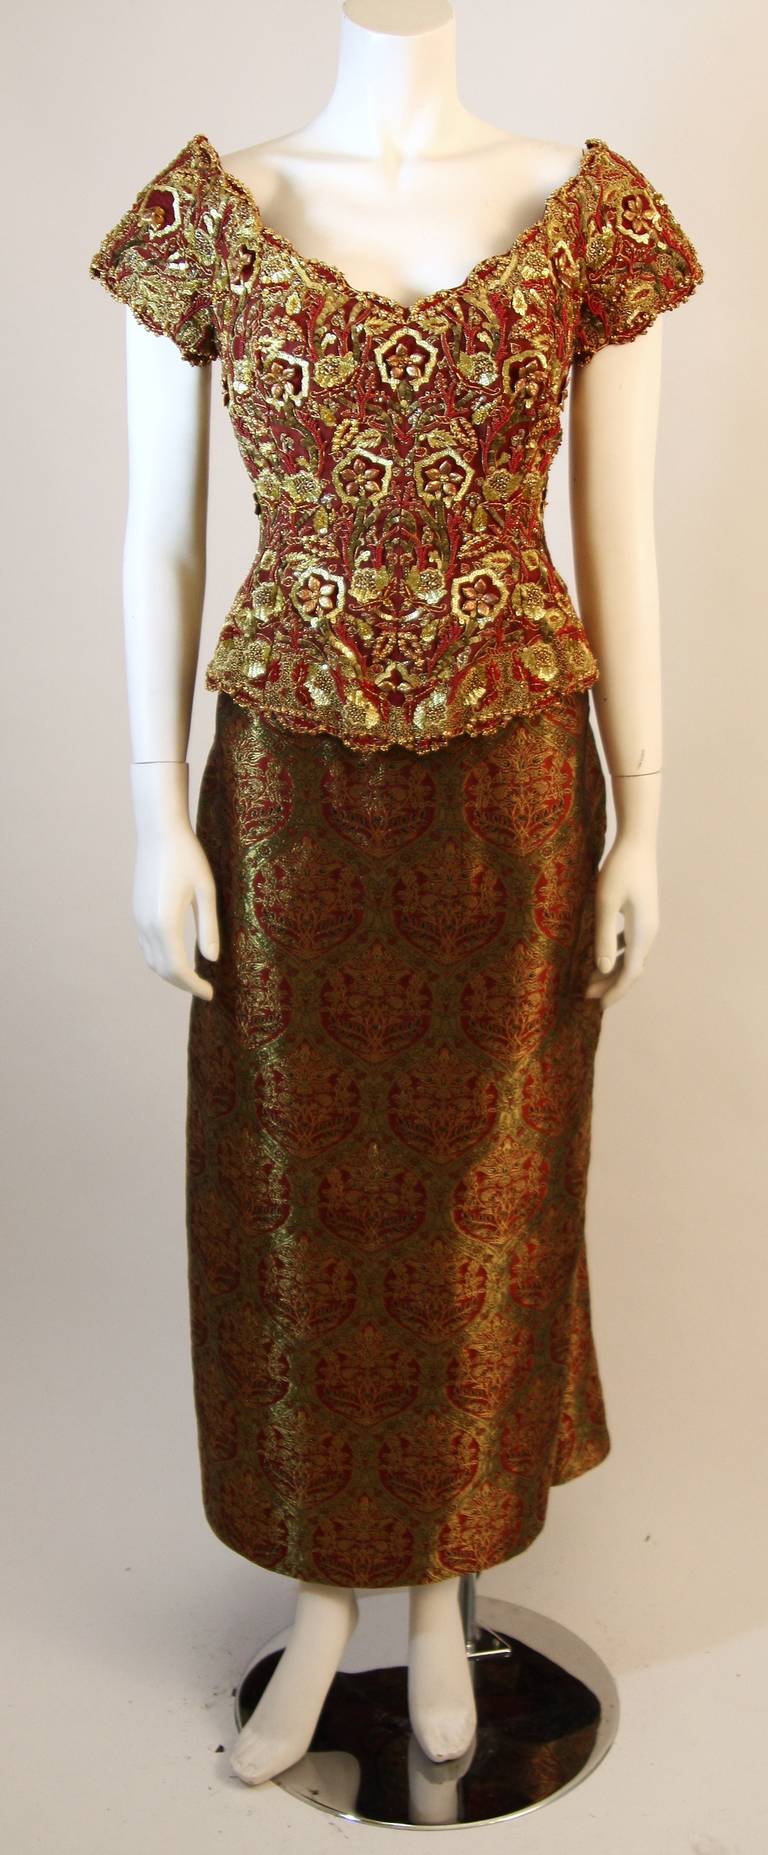 This is a beautiful Oscar De La Renta ensemble. This wonderful set features a strikingly embellished beaded and embroidered bodice with center back zipper closure. The top can be used on or off the shoulders. The beautiful silk skirt features a